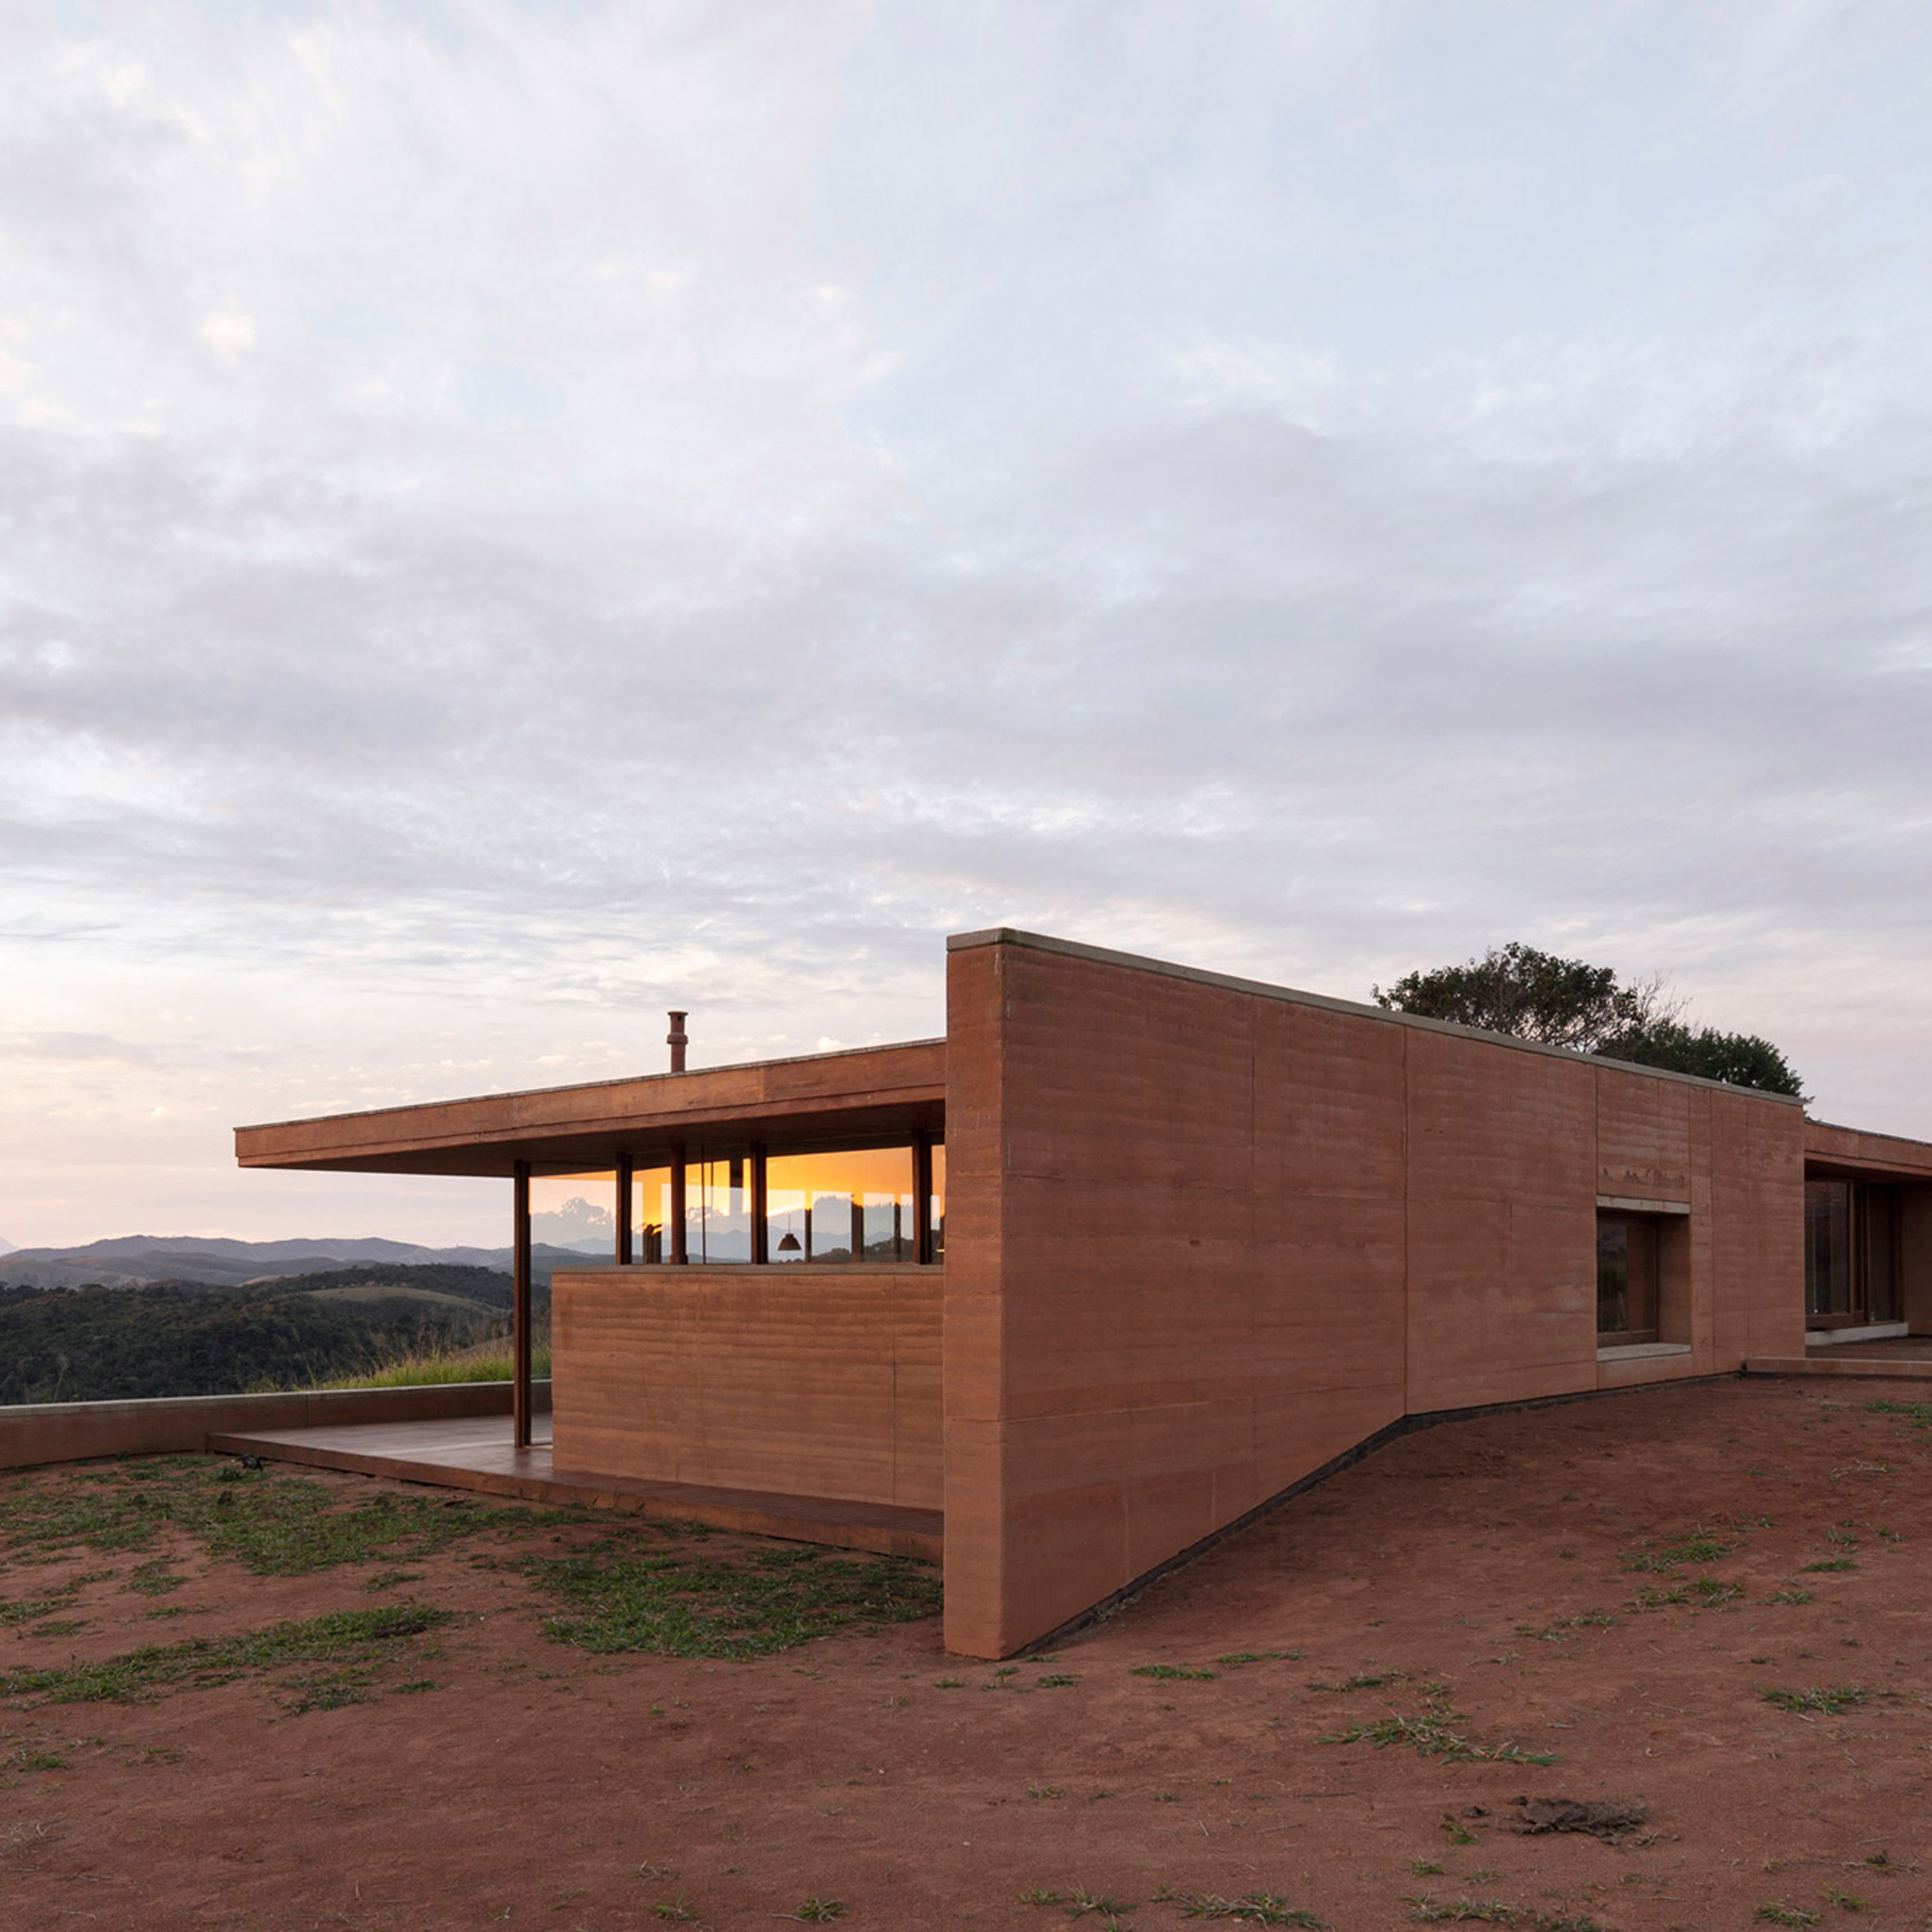 Arquipélago Arquitetos builds low-slung house with rammed earth